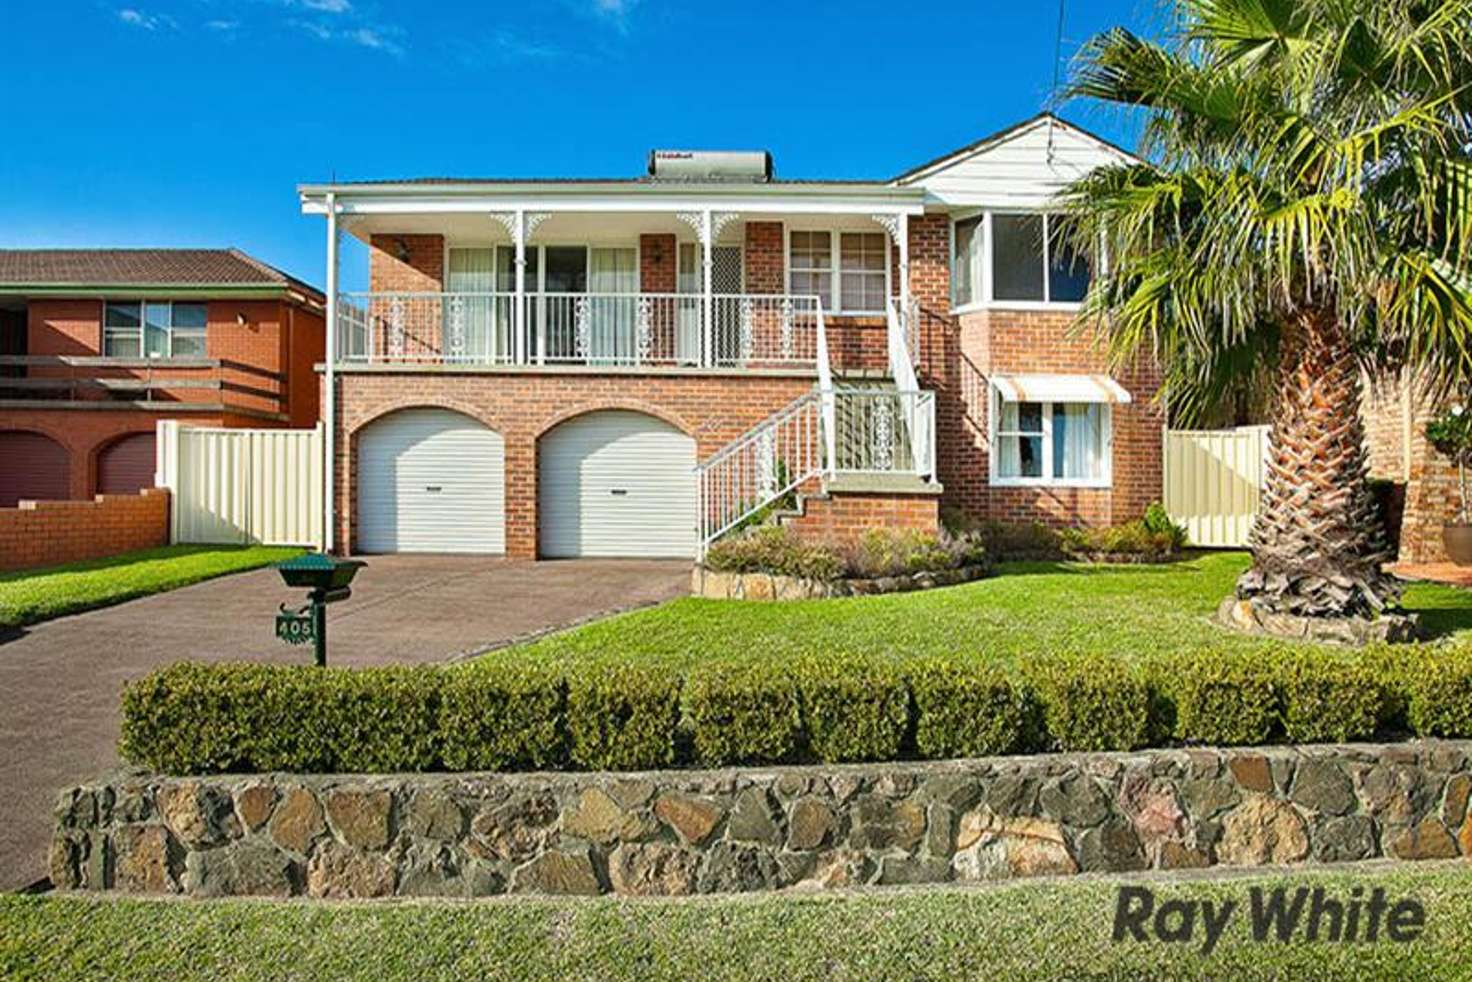 Main view of Homely house listing, 405 Reddall Pde, Mount Warrigal NSW